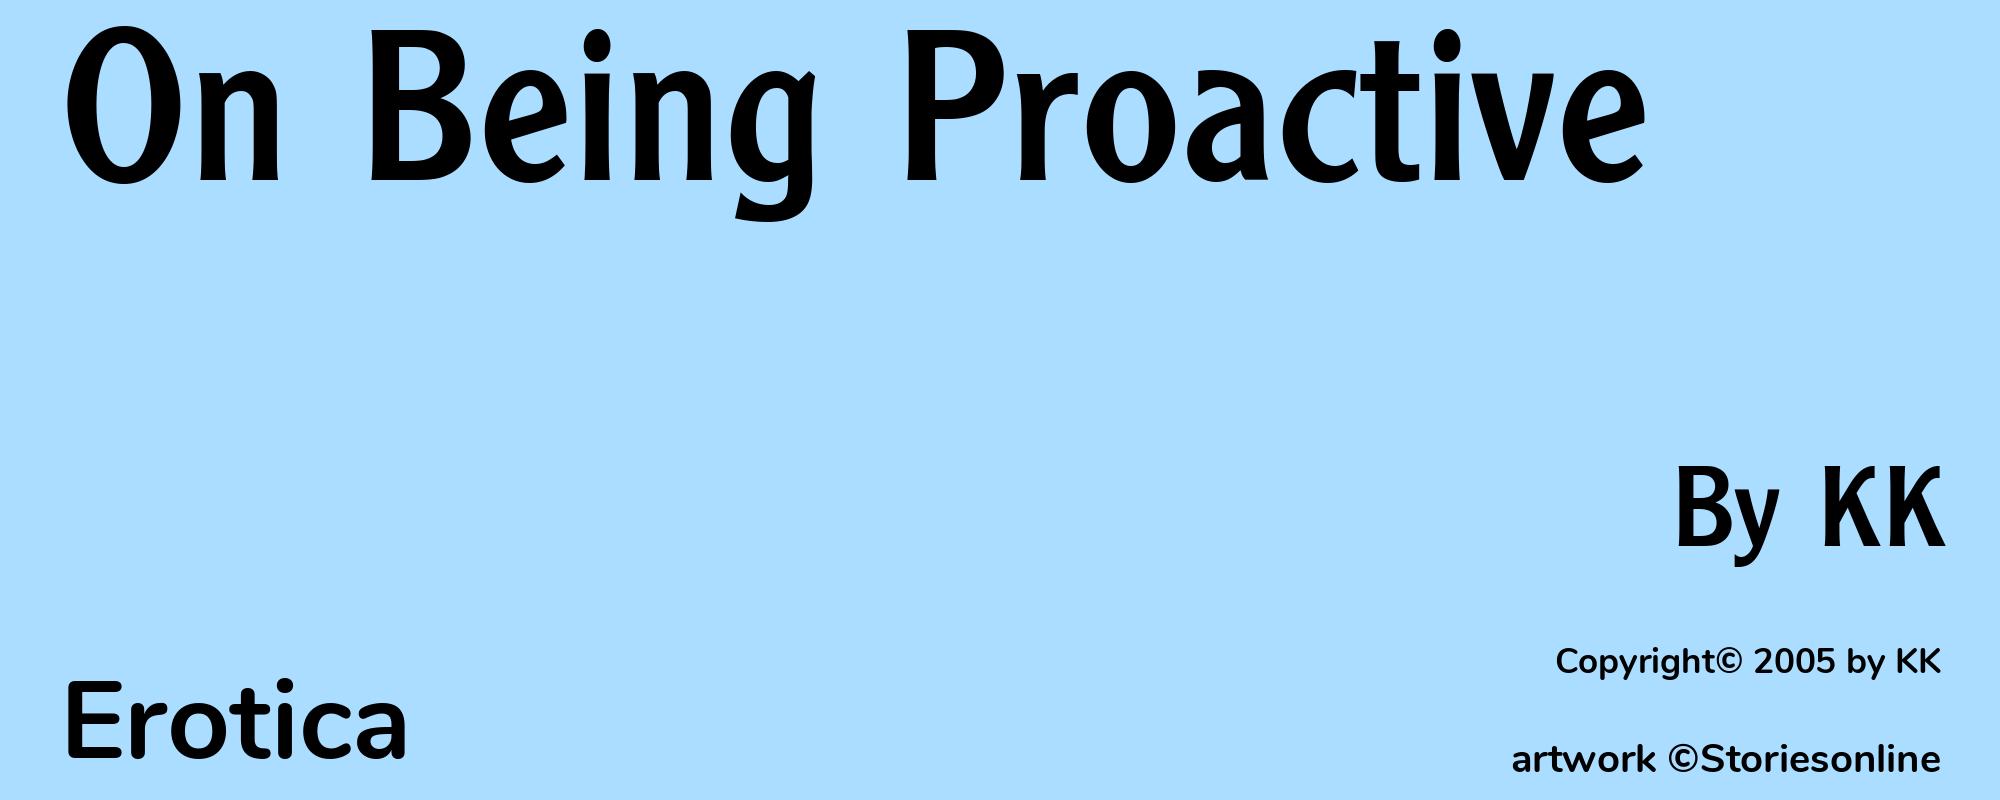 On Being Proactive - Cover